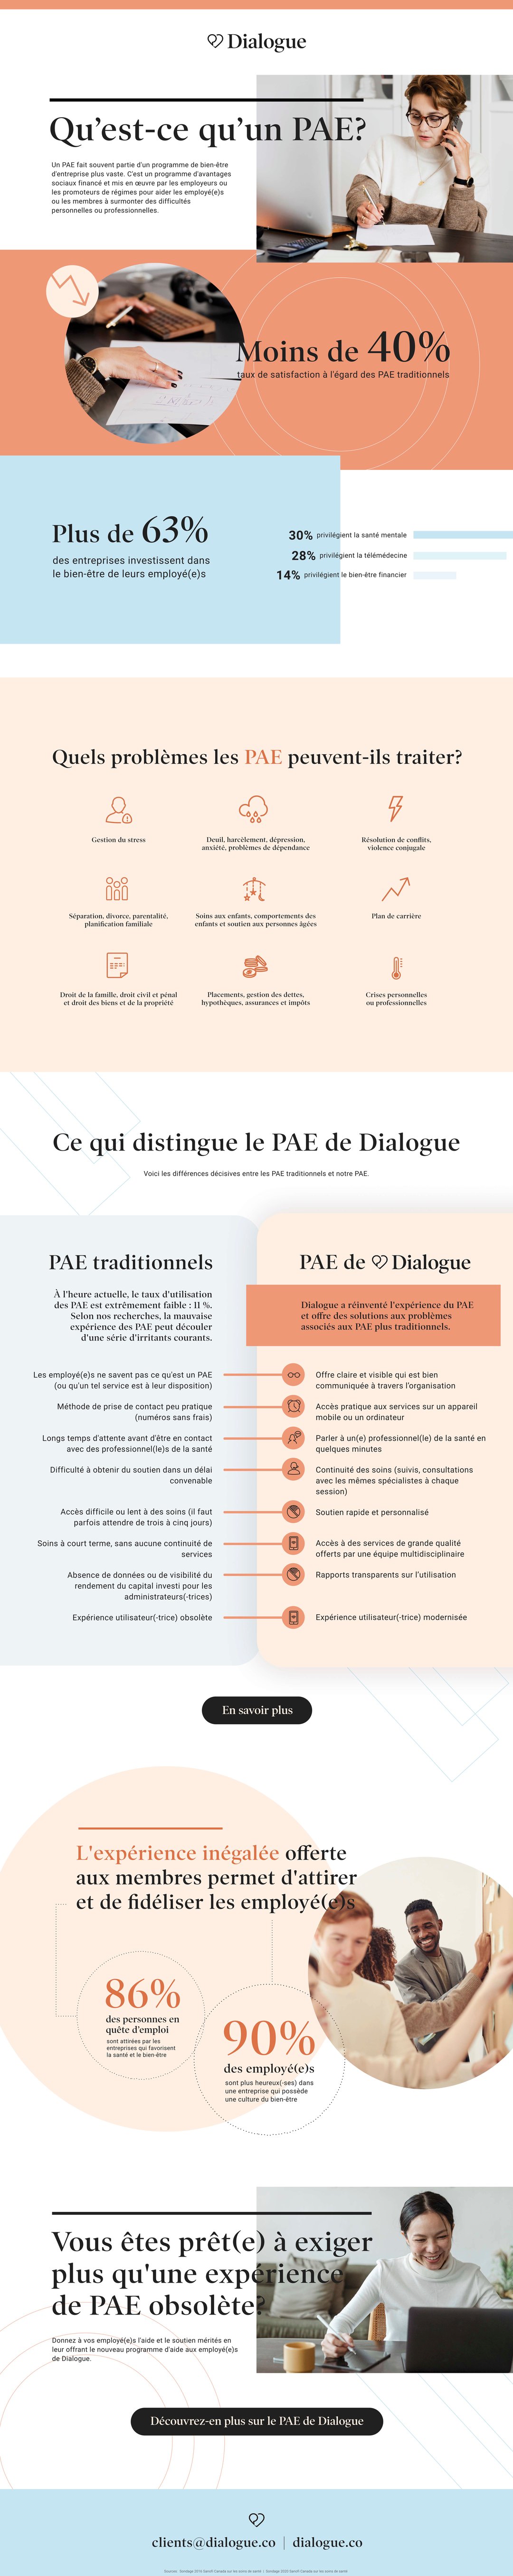 Dialogue_EAPInfographic_FR